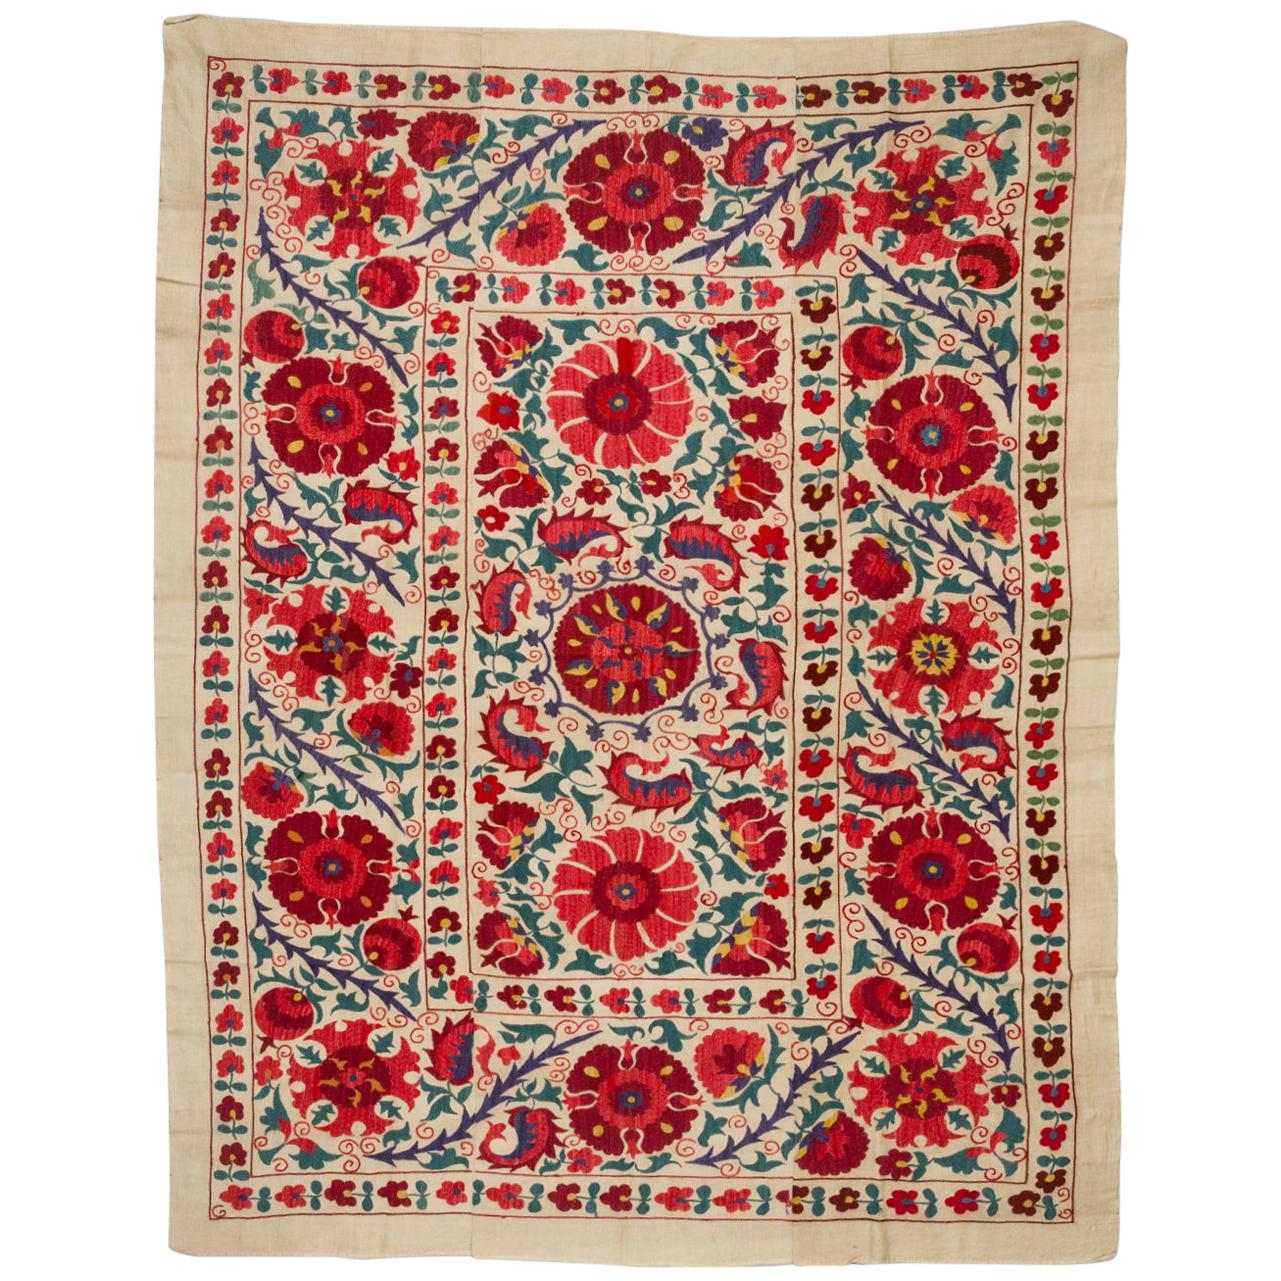 SUSANI Embroidered Tapestry